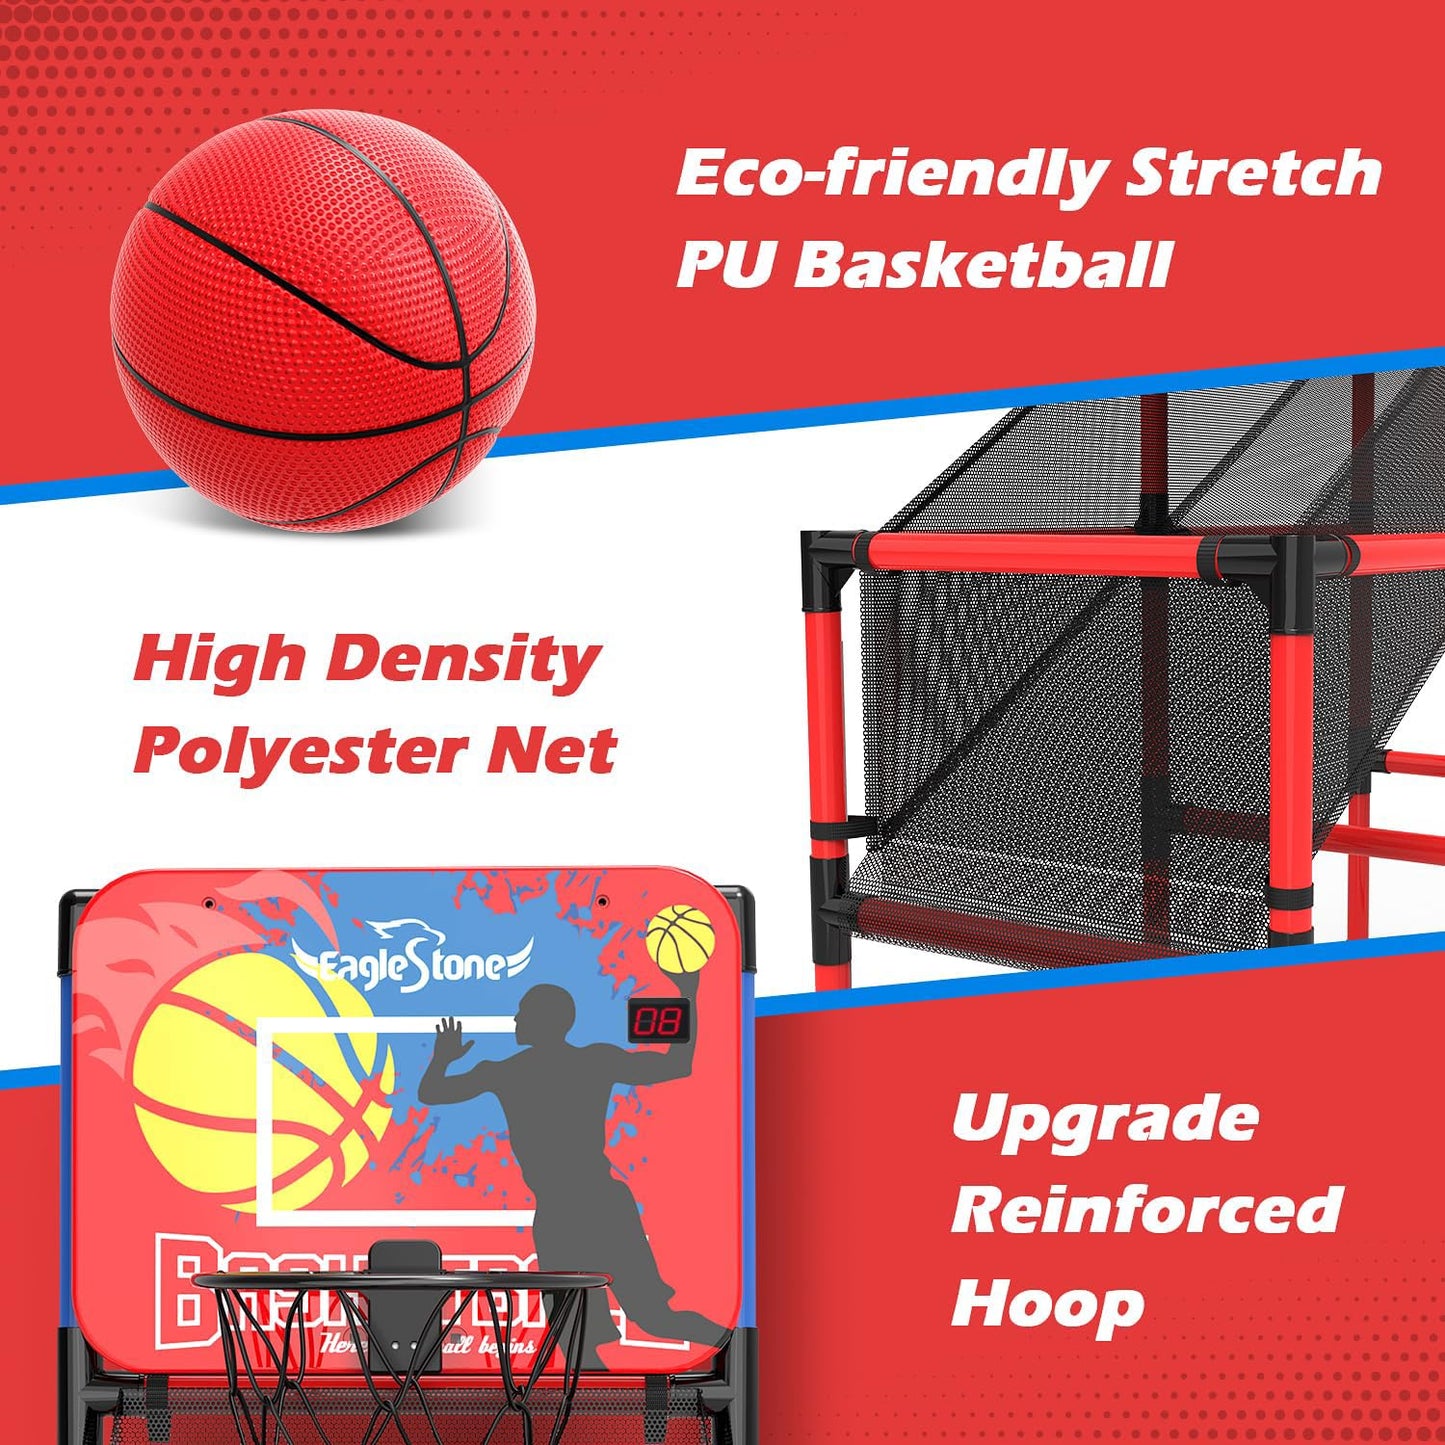 Kids Basketball Hoop Arcade Game W/Electronic Scoreboard Cheer Sound, Basketball Hoop Indoor Outdoor W/4 Balls, Basketball Game Toys Gifts for Kids 3-6 5-7 8-12 Toddlers Boys Girls